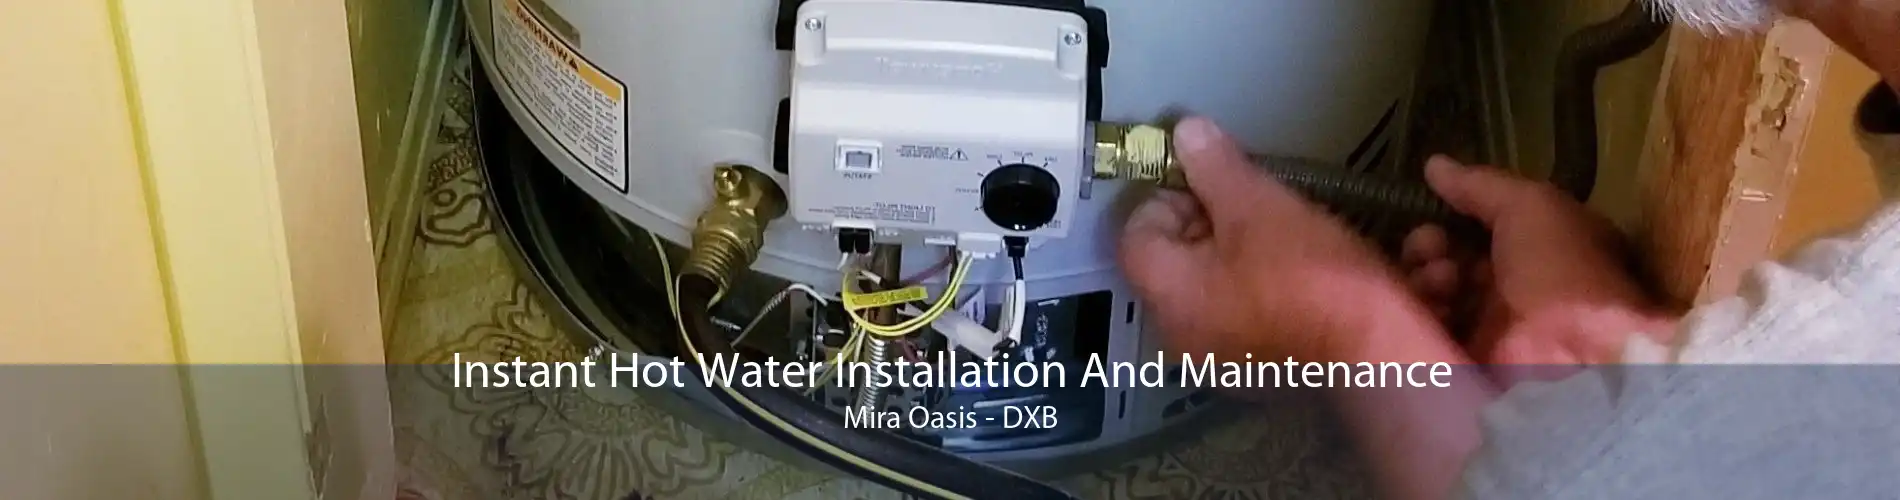 Instant Hot Water Installation And Maintenance Mira Oasis - DXB